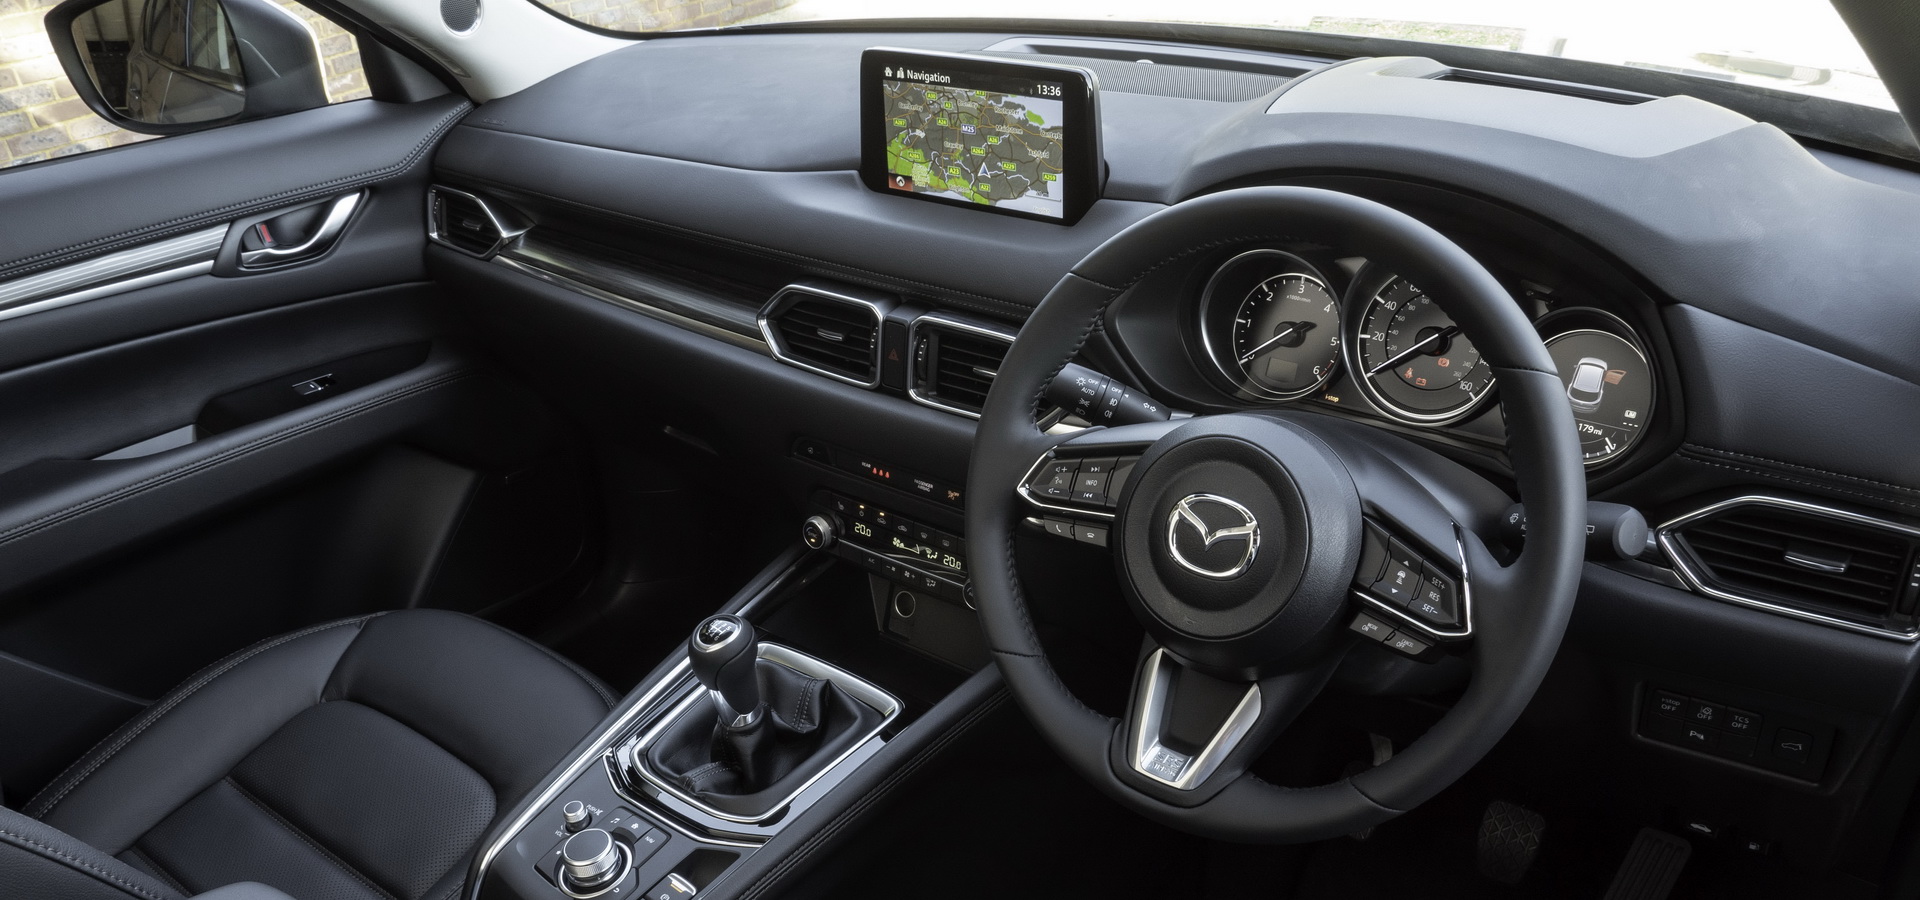 Mazda Cx 5 Gets New Engine Tech And Polymetal Grey Color For Uk Carscoops